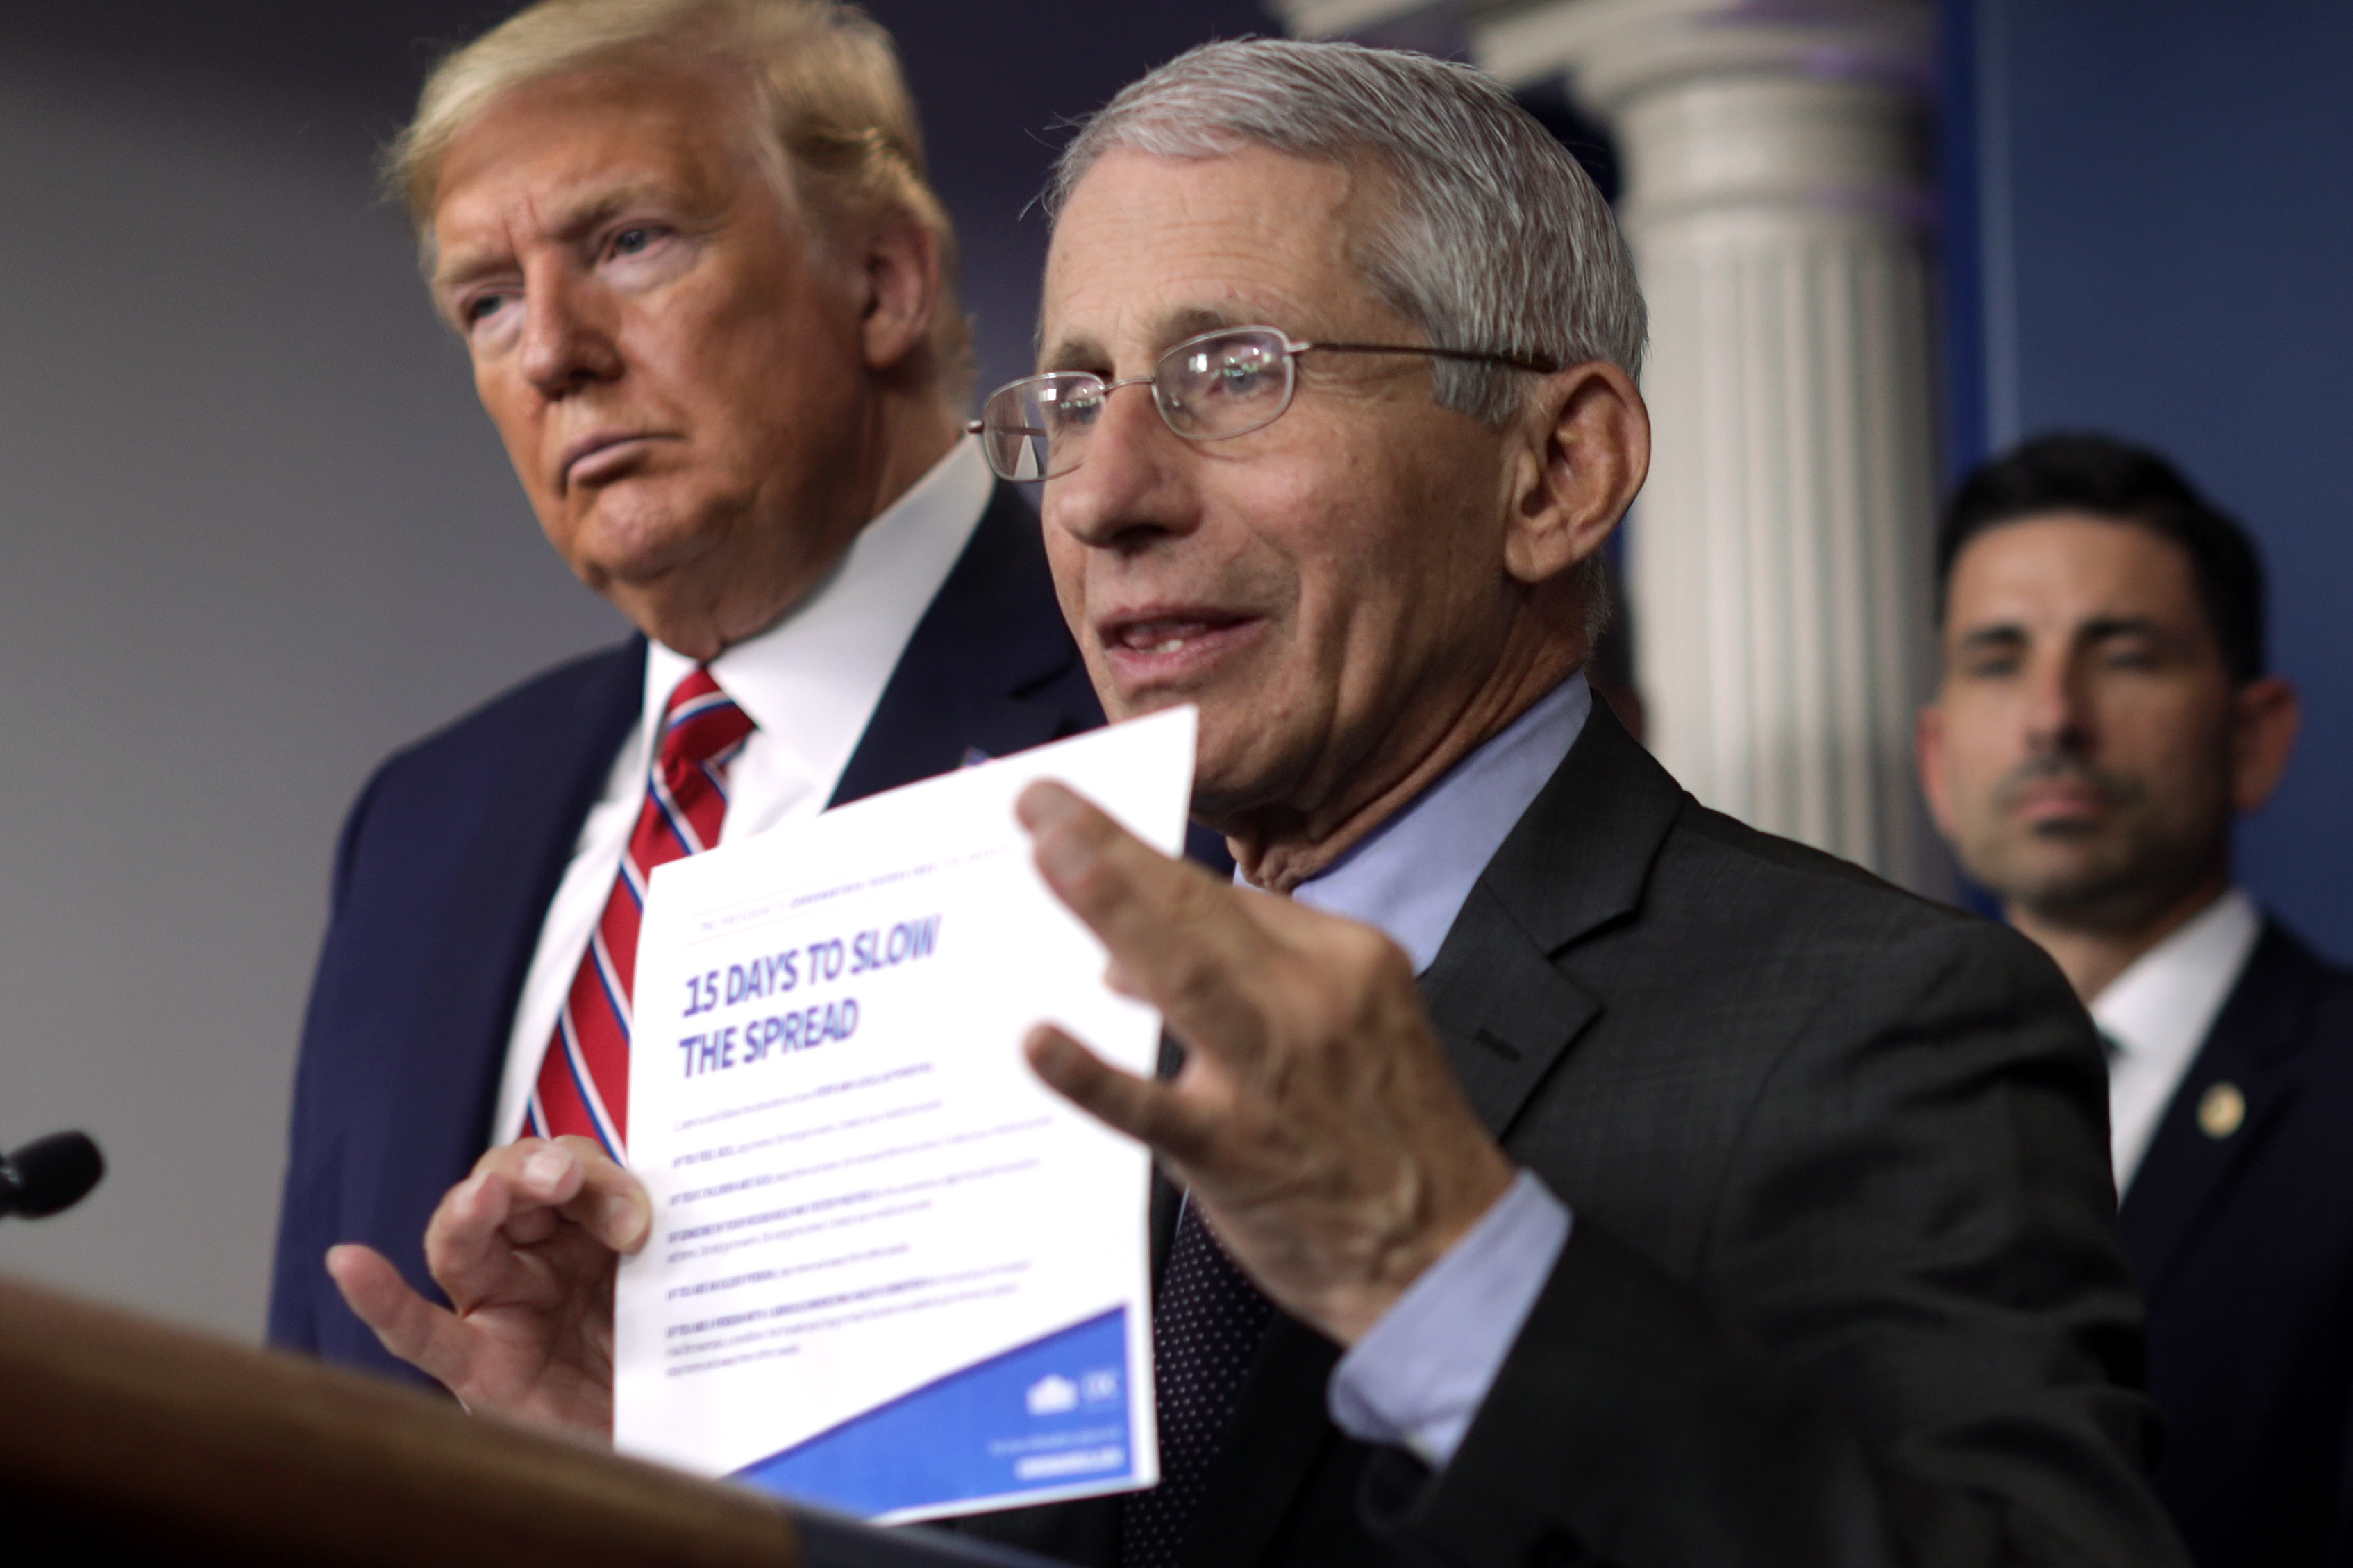 WASHINGTON, DC - MARCH 20: Director of the National Institute of Allergy and Infectious Diseases Dr. Anthony Fauci holds up the "15 Days to Slow the Spread" instruction as U.S. President Donald Trump looks on during a news briefing on the latest development of the coronavirus outbreak in the U.S. at the James Brady Press Briefing Room at the White House March 20, 2020 in Washington, DC. With deaths caused by the coronavirus rising and foreseeable economic turmoil, the Senate is working on legislation for a $1 trillion aid package to deal with the COVID-19 pandemic. President Trump announced that tax day will be delayed from April 15 to July 15. (Photo by Alex Wong/Getty Images)